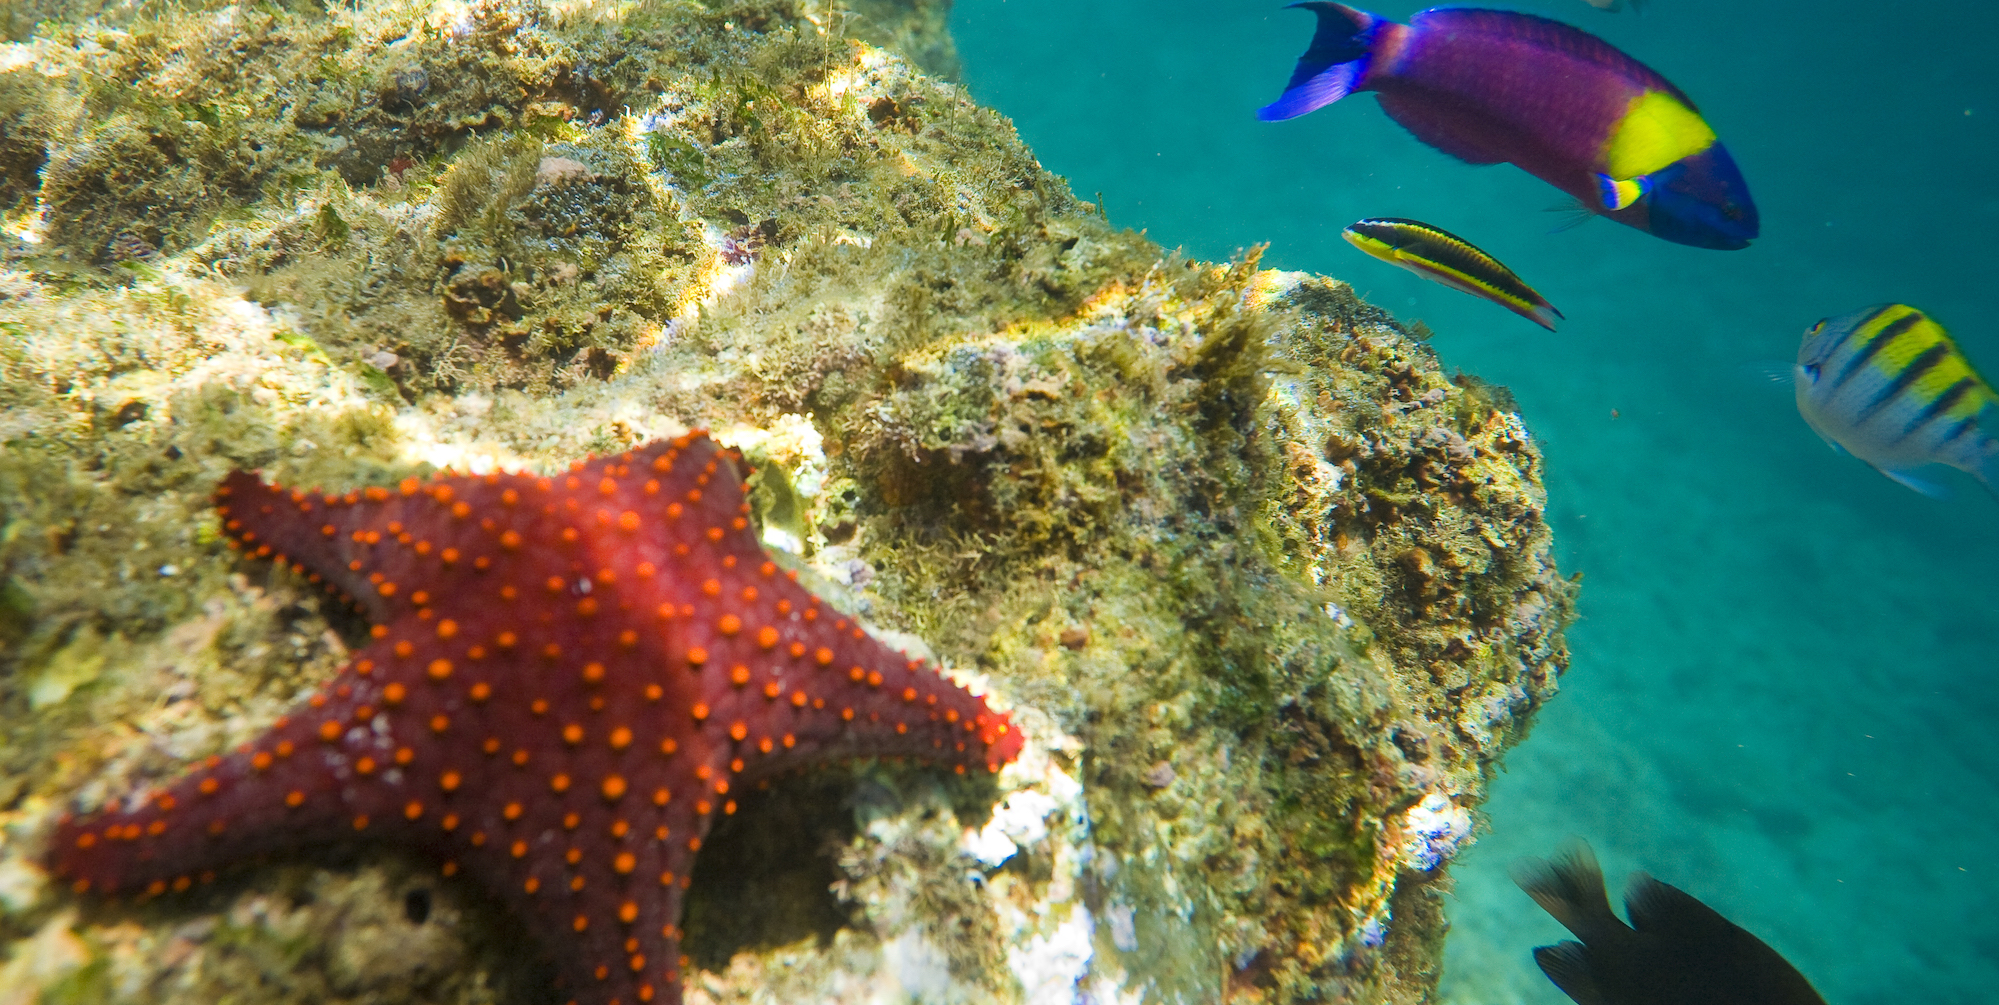 A red sea star perched on a rock while tropical fish swim past underwater